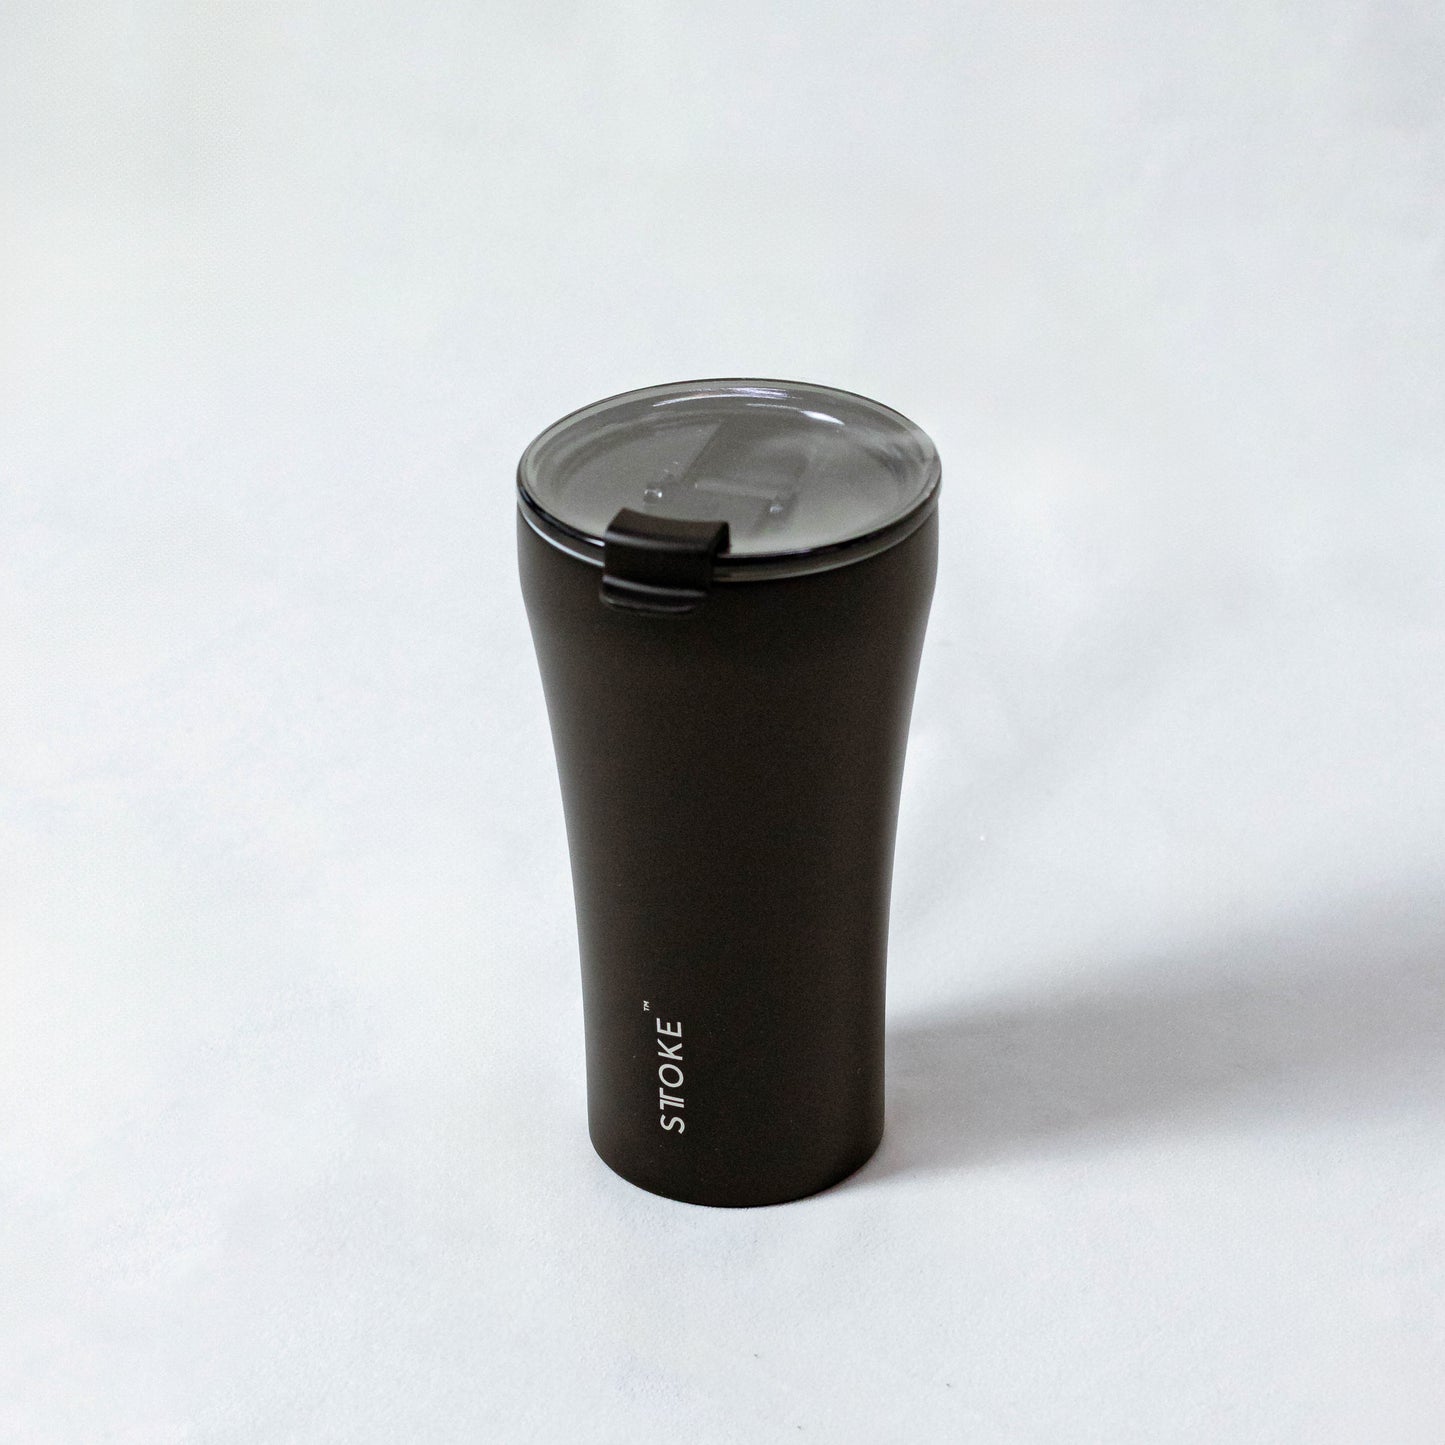 NEW! Customised Sttoke Insulated Ceramic Cup (Shatterproof) - Luxe Black (12 oz) (Out of stock)